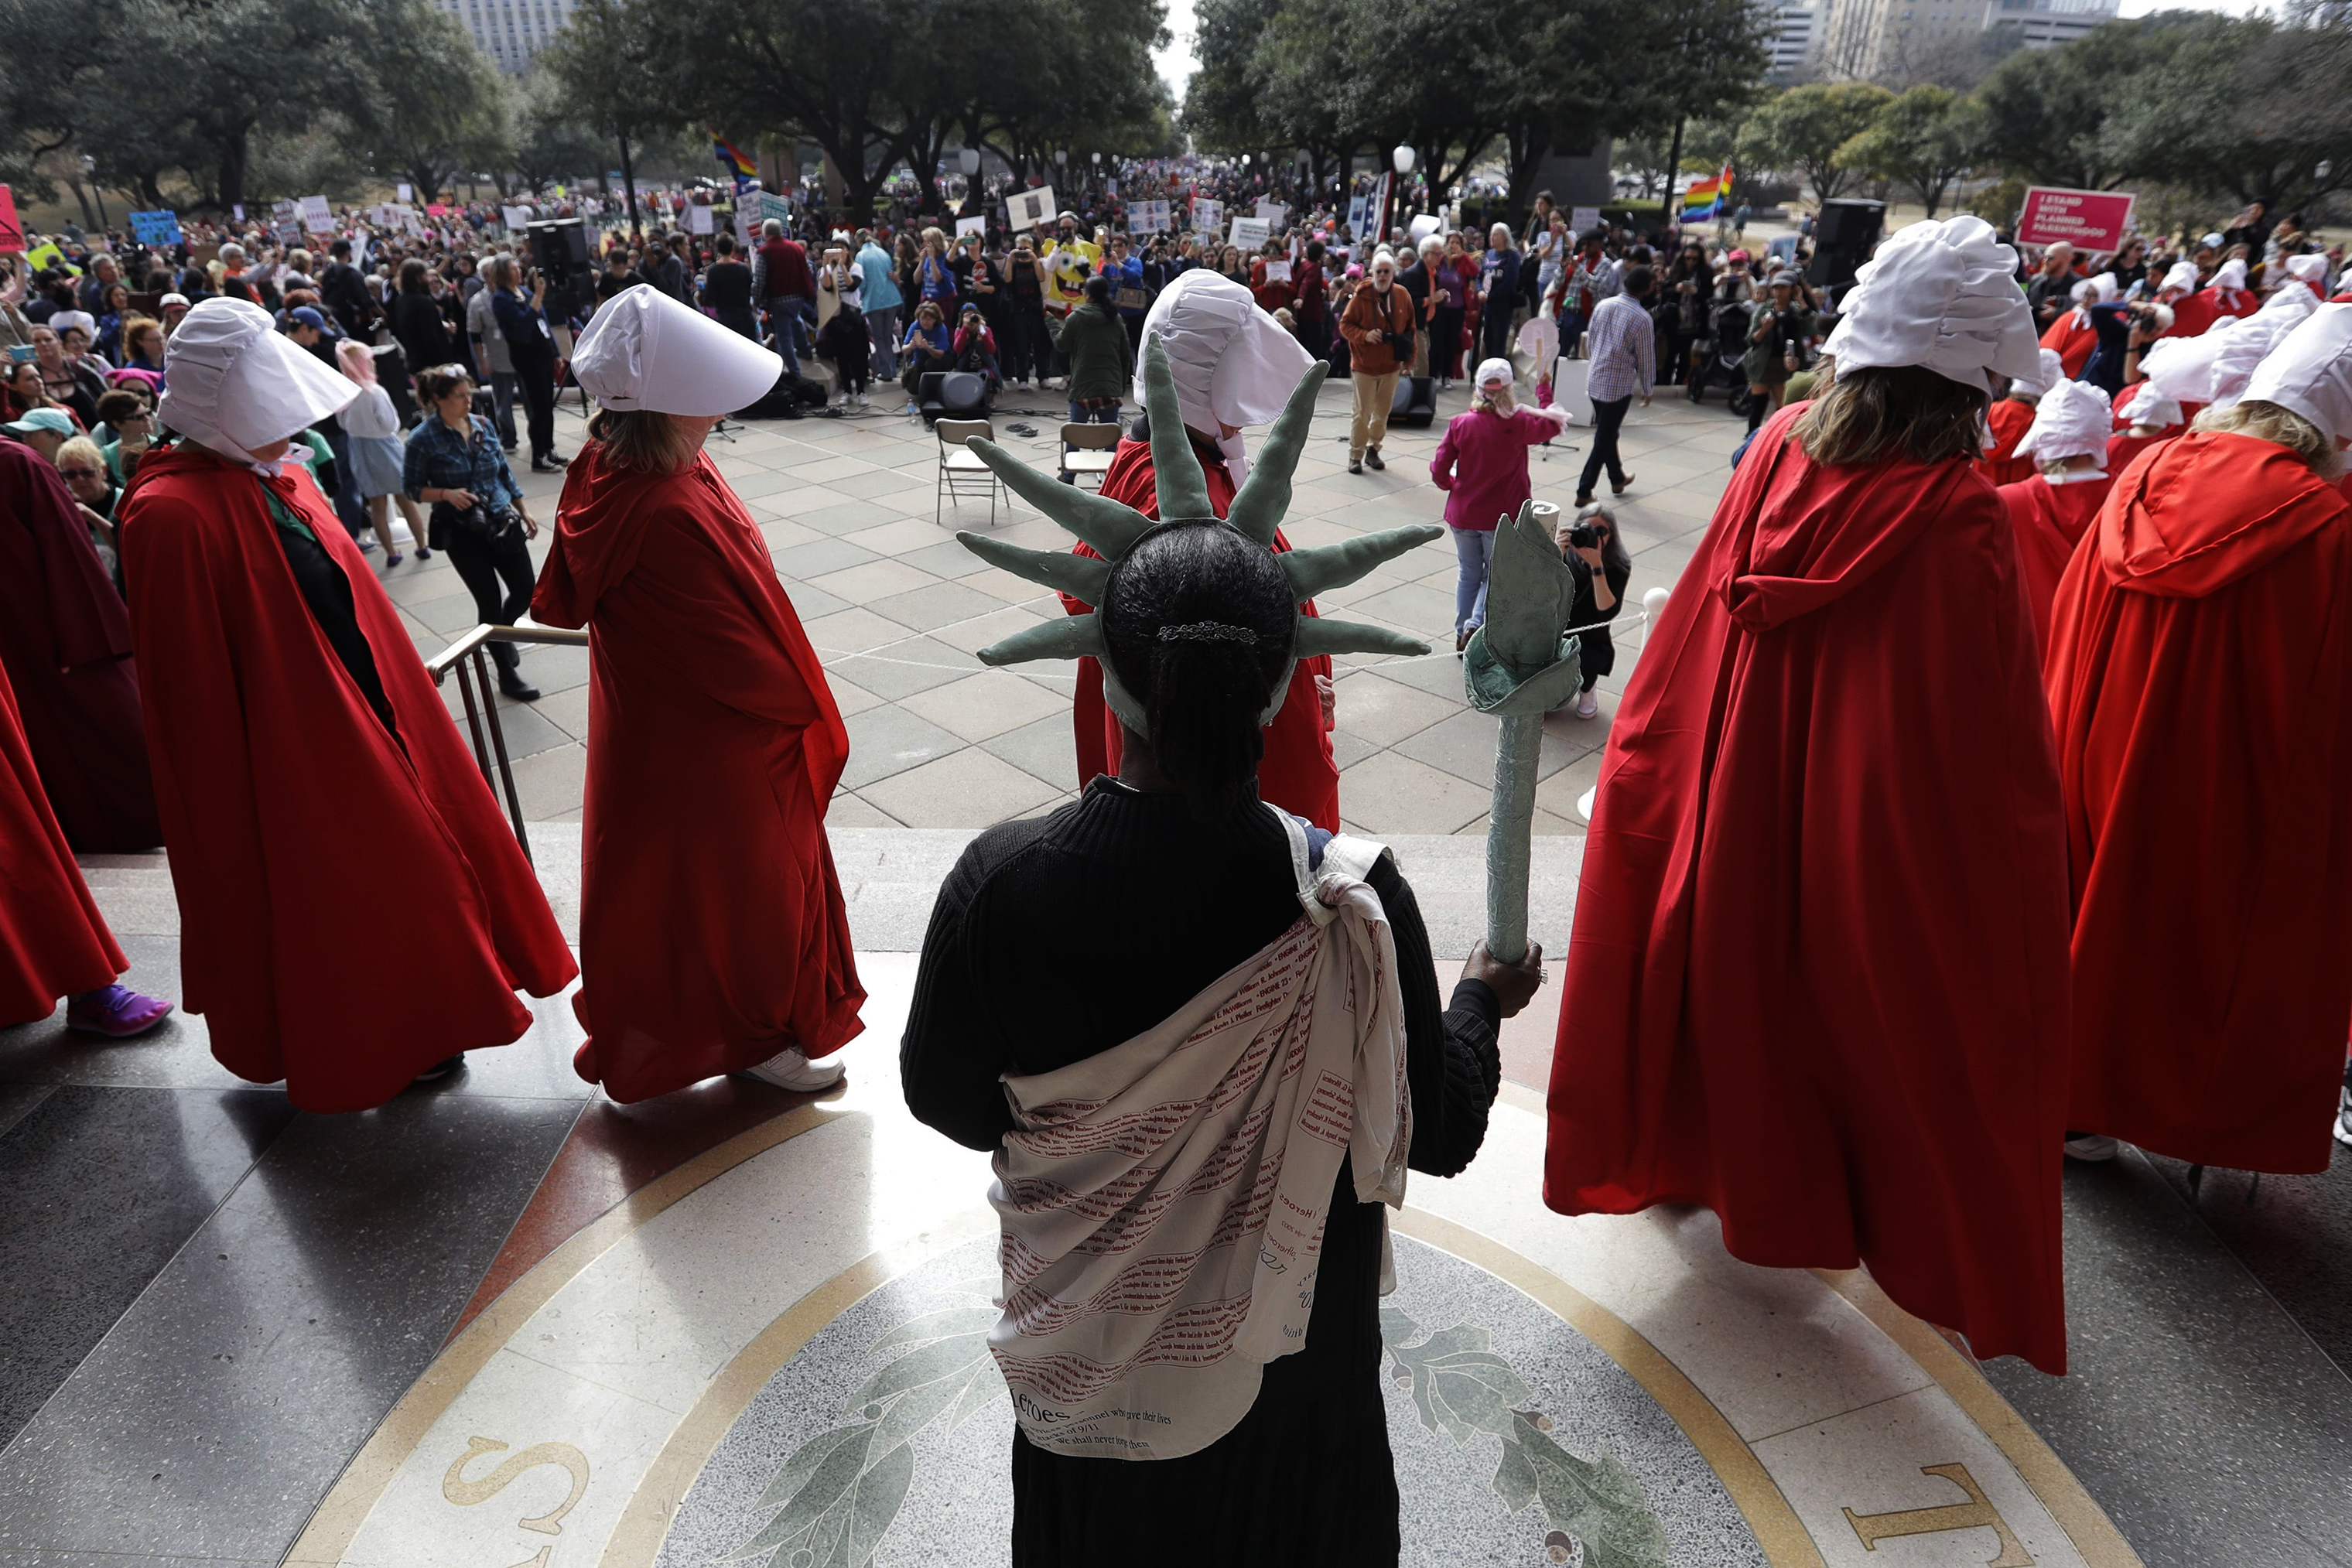 Texas Handmaids at the women's march to the Texas State Capitol in Austin. (Eric Gay—AP/Shutterstock)